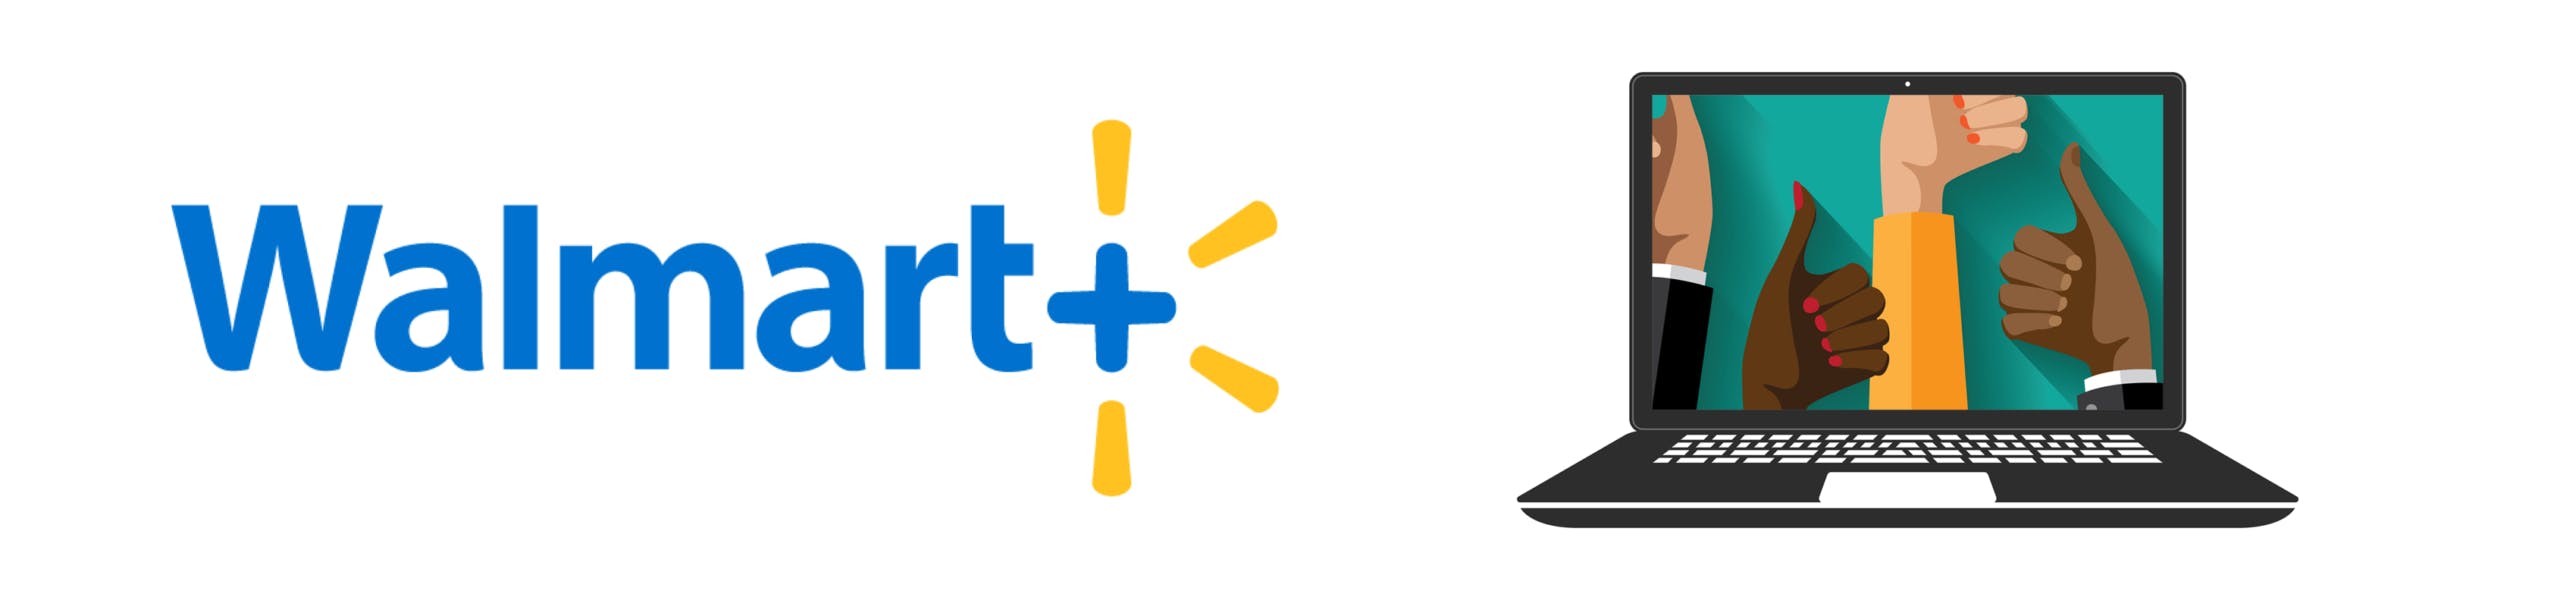 Walmart logo next to a laptop with thumbs pointing up